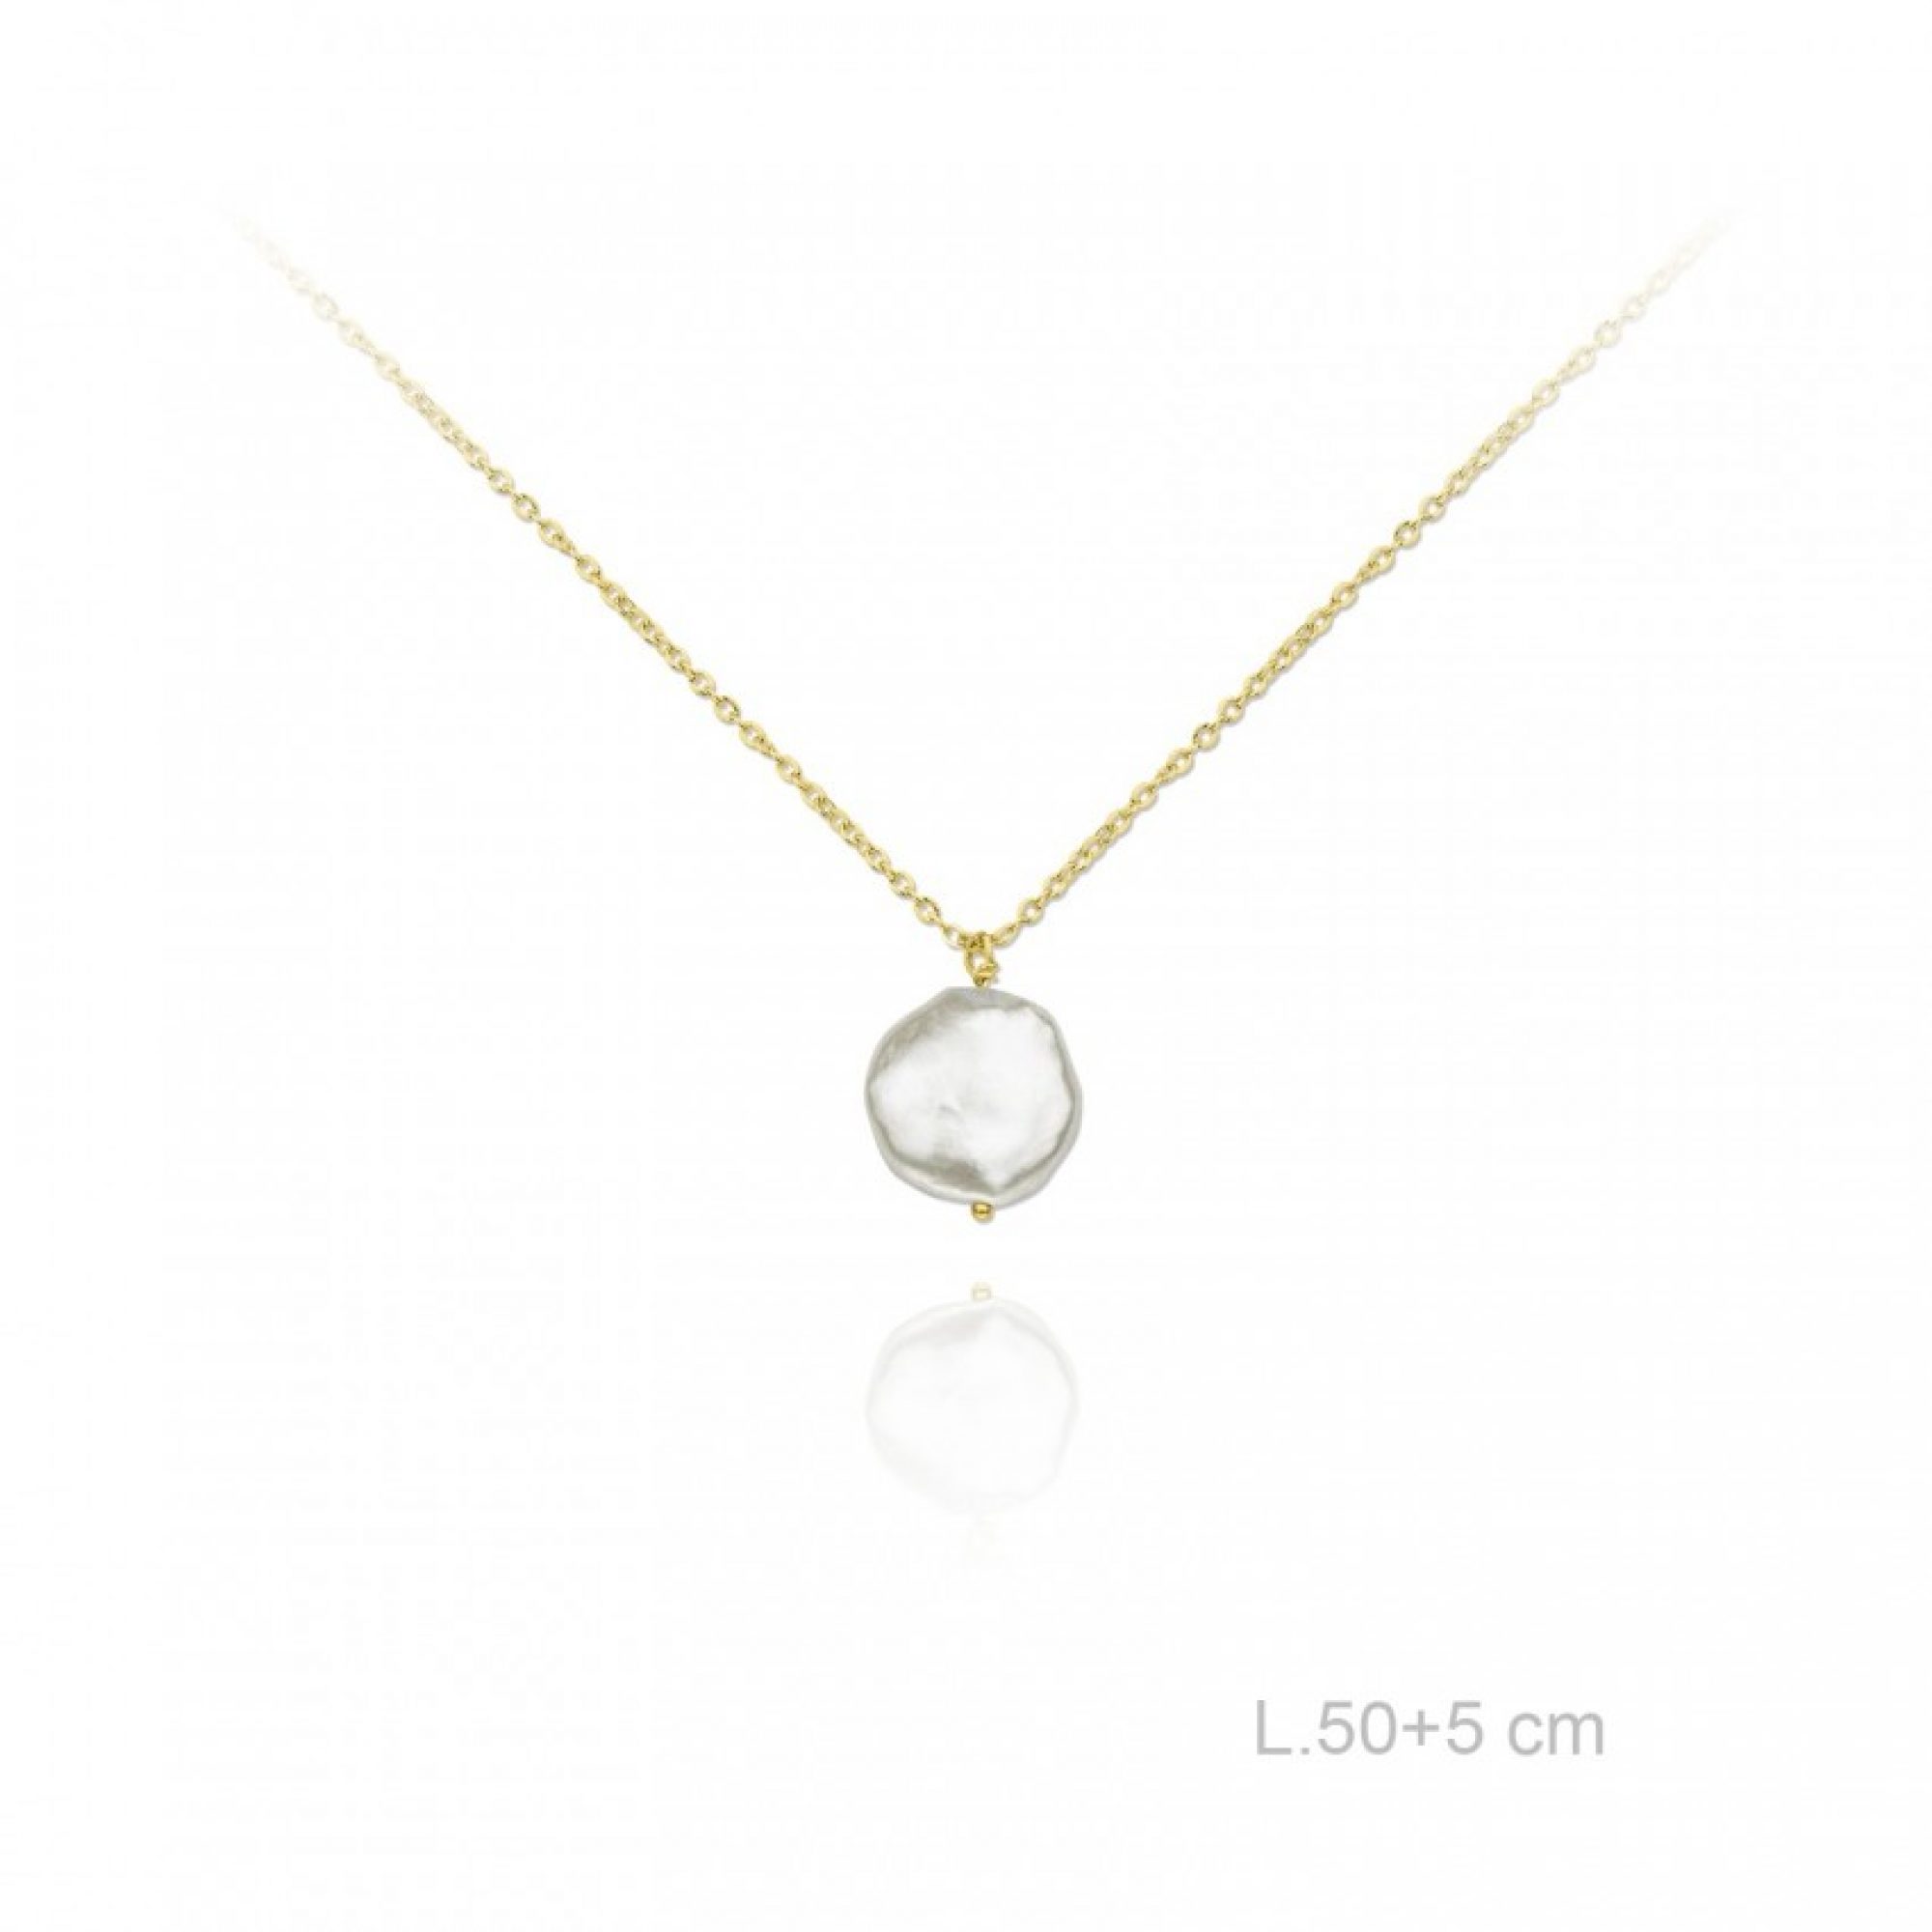 Gold plated necklace with mother of pearl